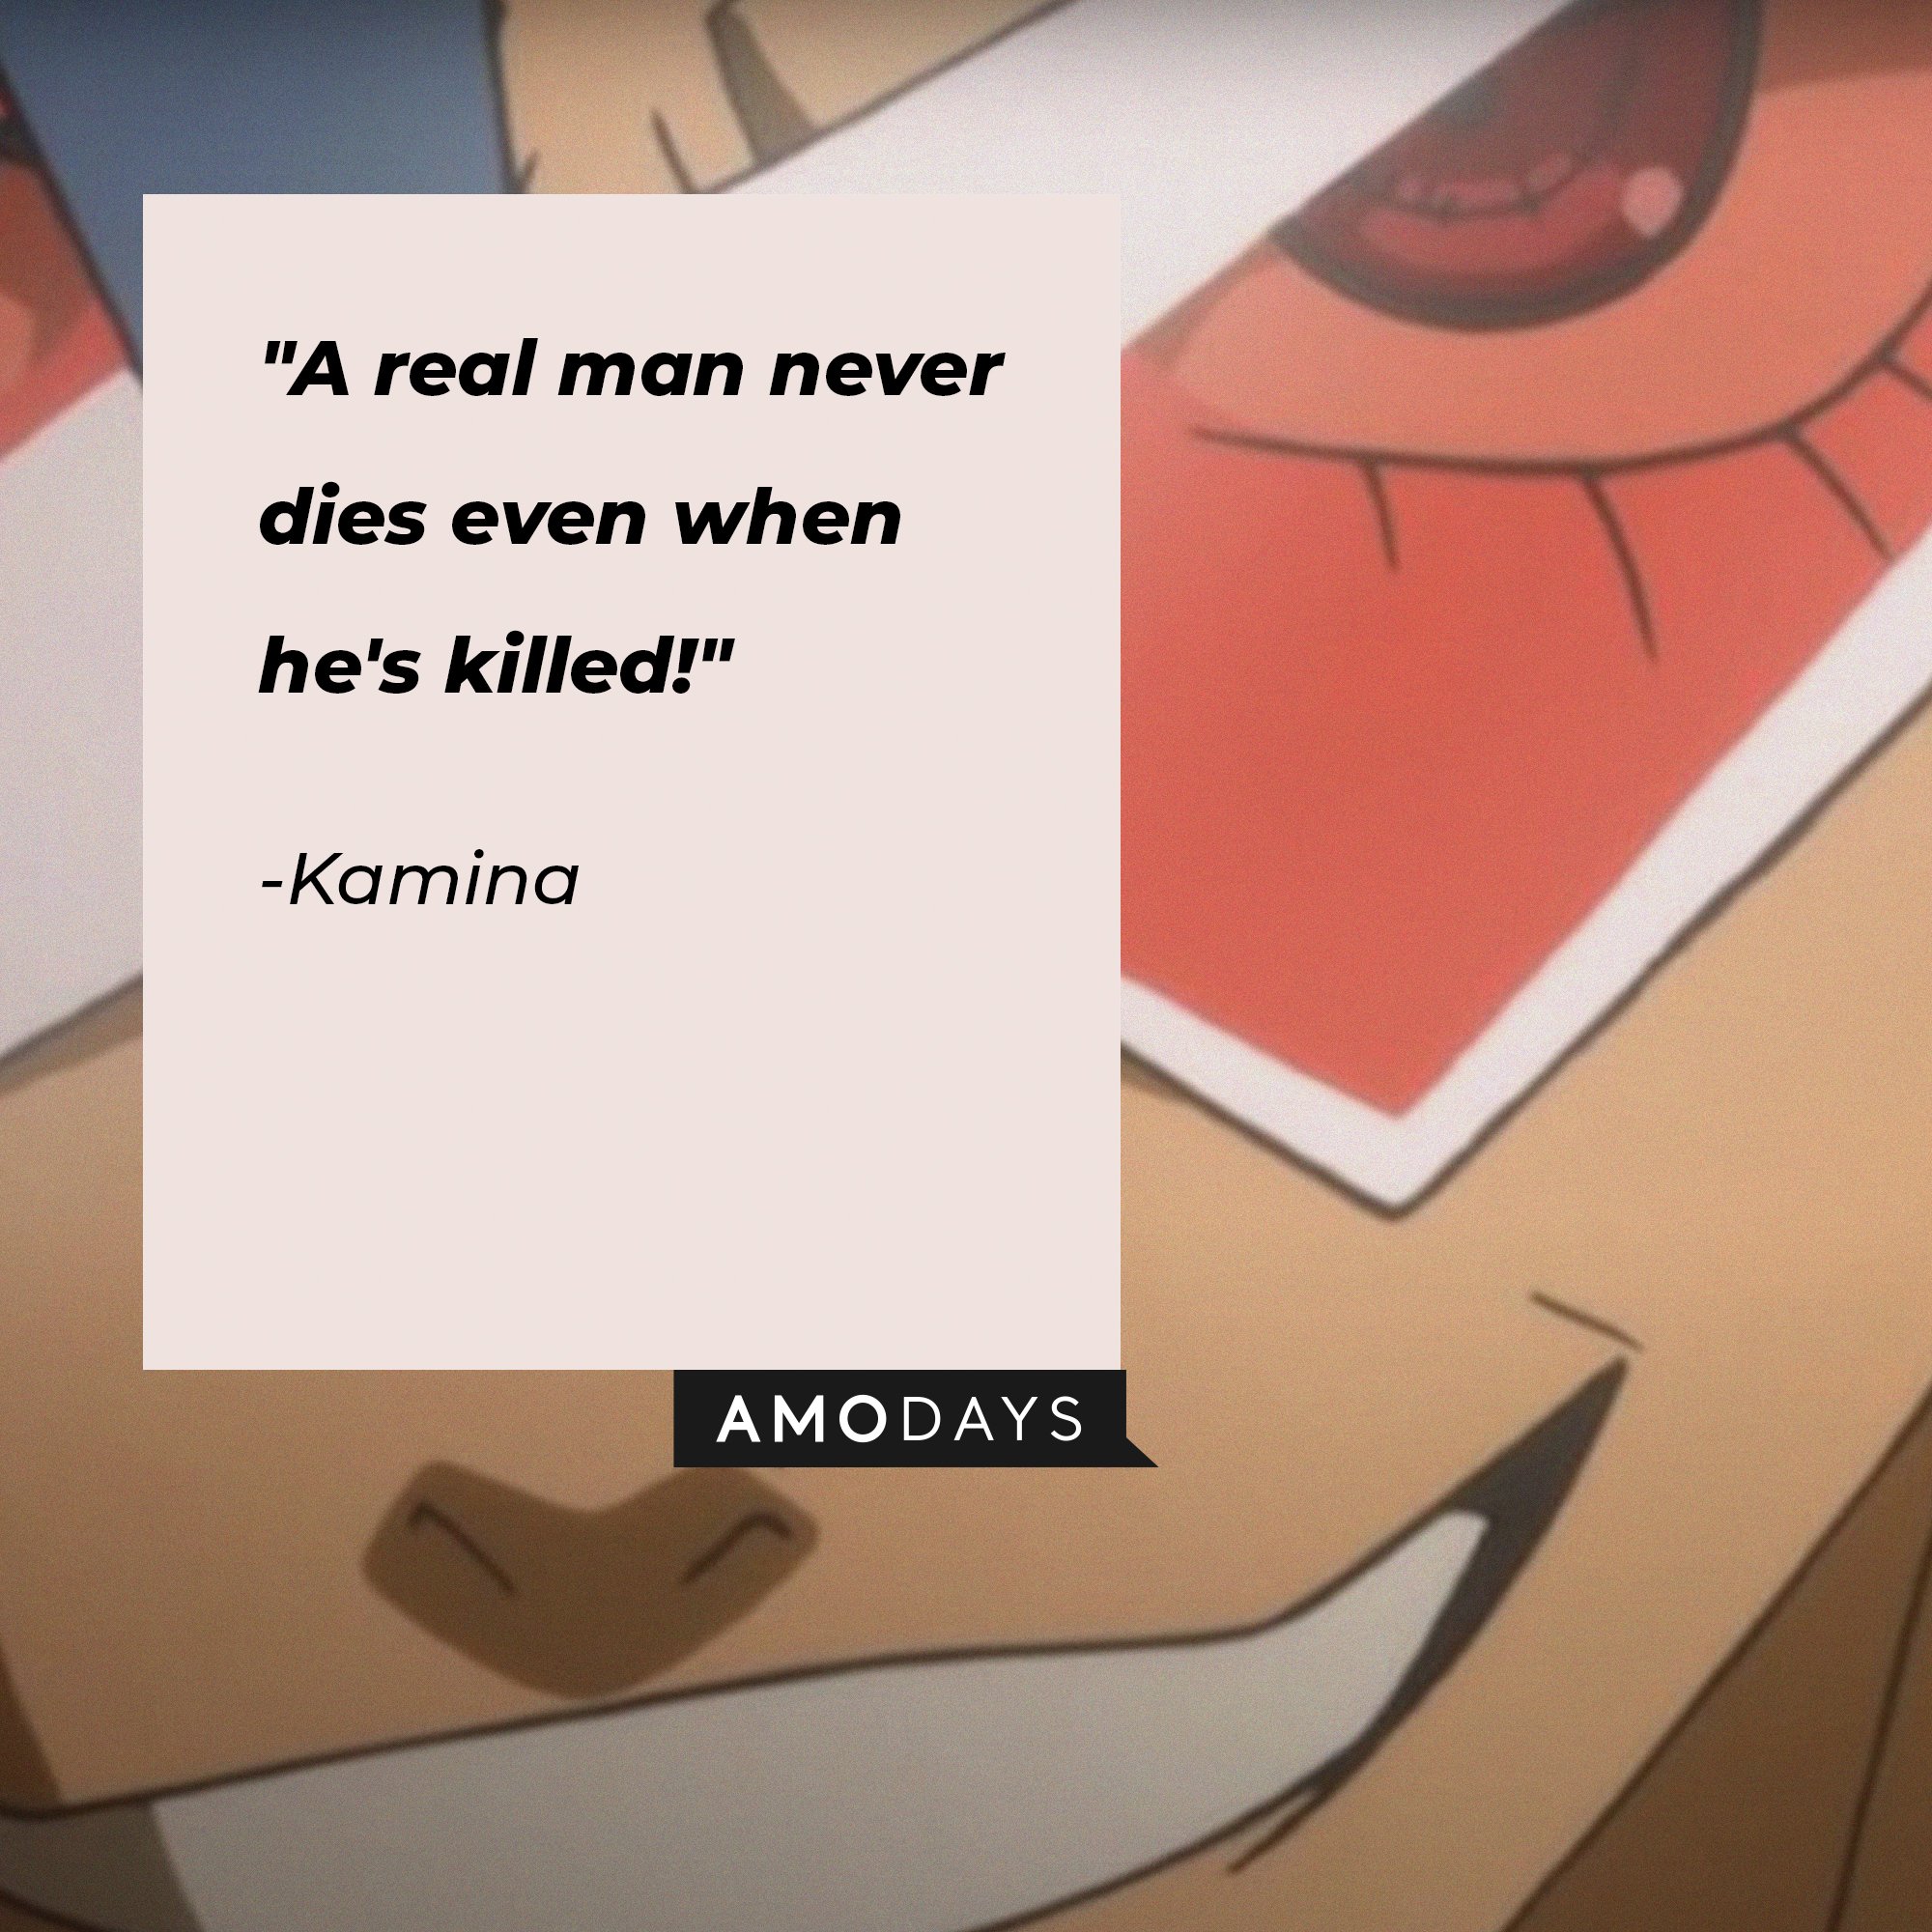 Kamina’s quote: "A real man never dies even when he's killed!" | Image: AmoDays 